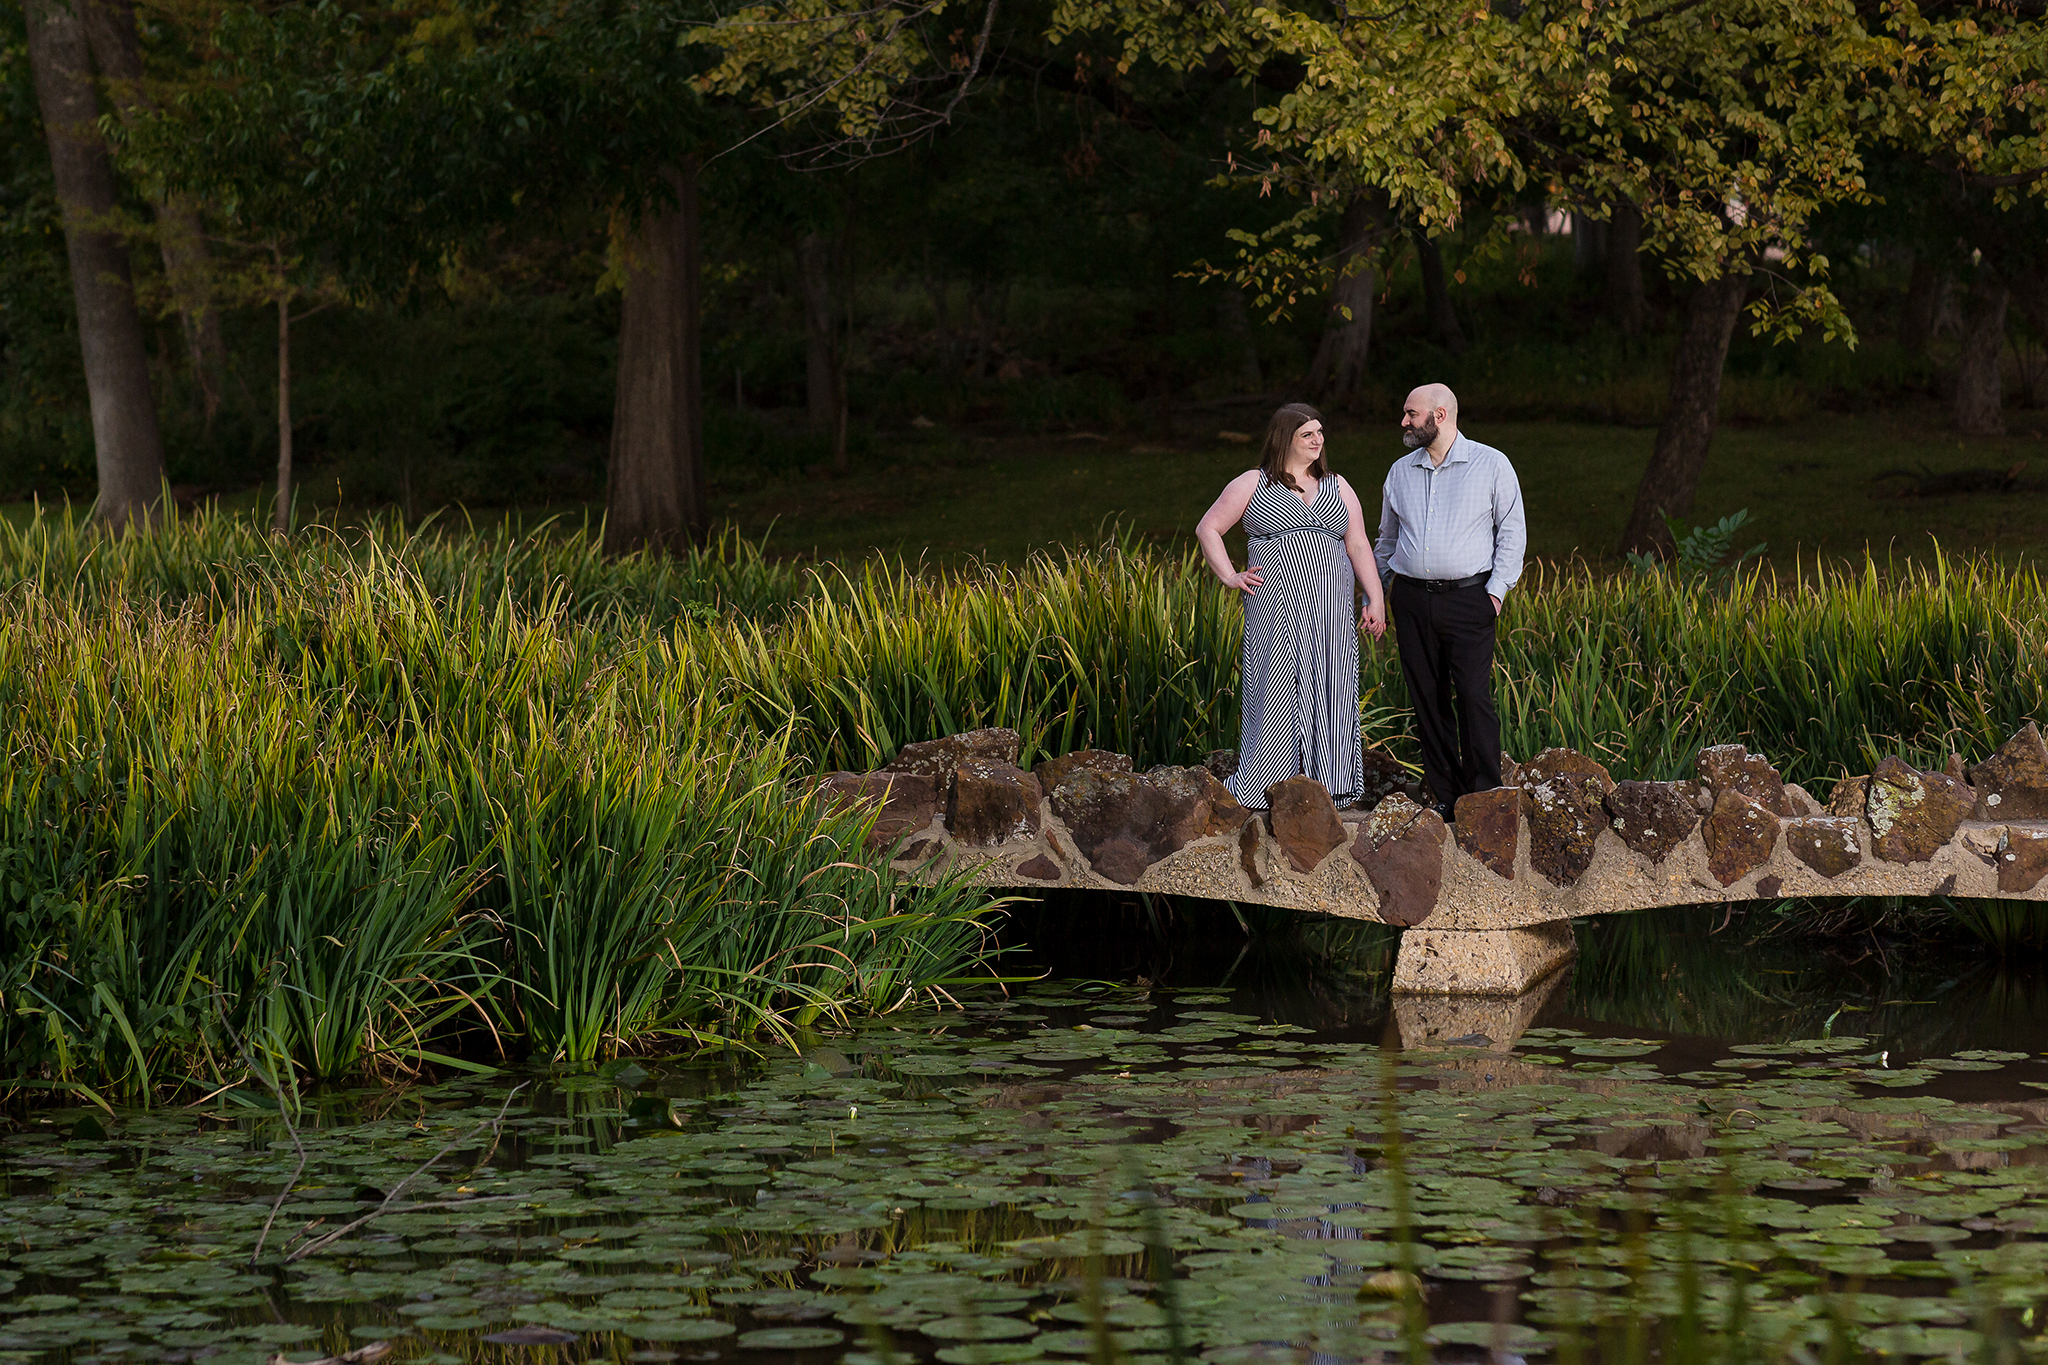 Dallas wedding photographer Stefani Ciotti Photography captures engagement photo at Texas Women's University with engaged couple standing together looking at each other on a bridge over a lake filled with Lilly pads with trees surrounding them